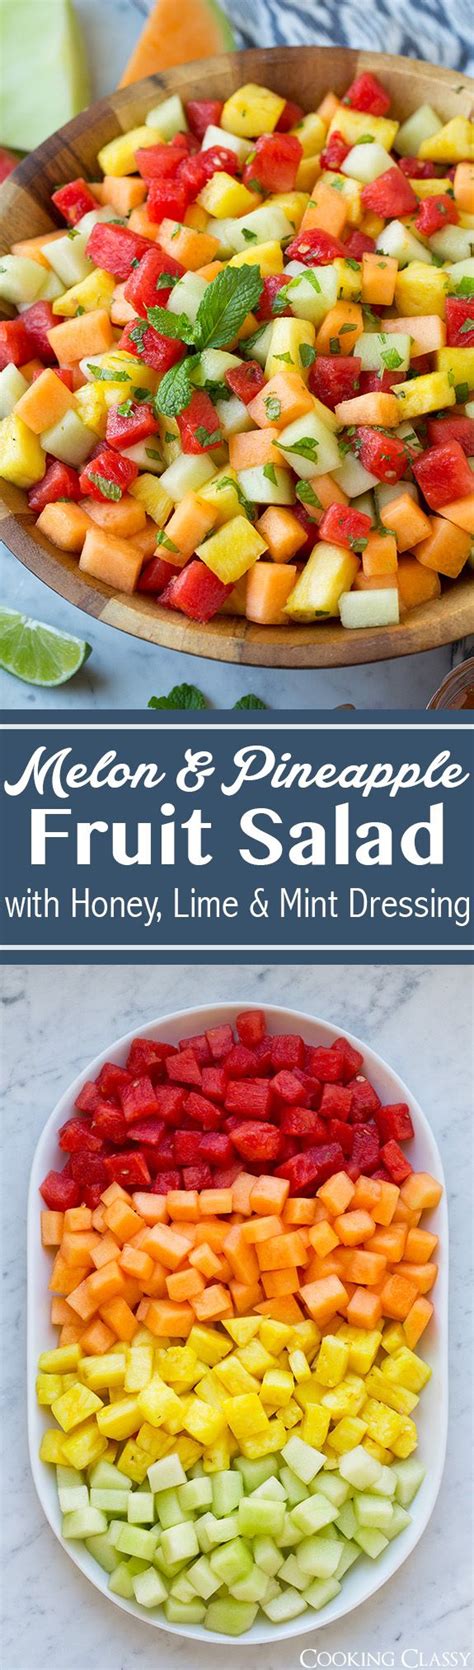 So easy to prepare for proper meals and so healthy at the same time! Melon Fruit Salad - the perfect spring and summer fruit ...